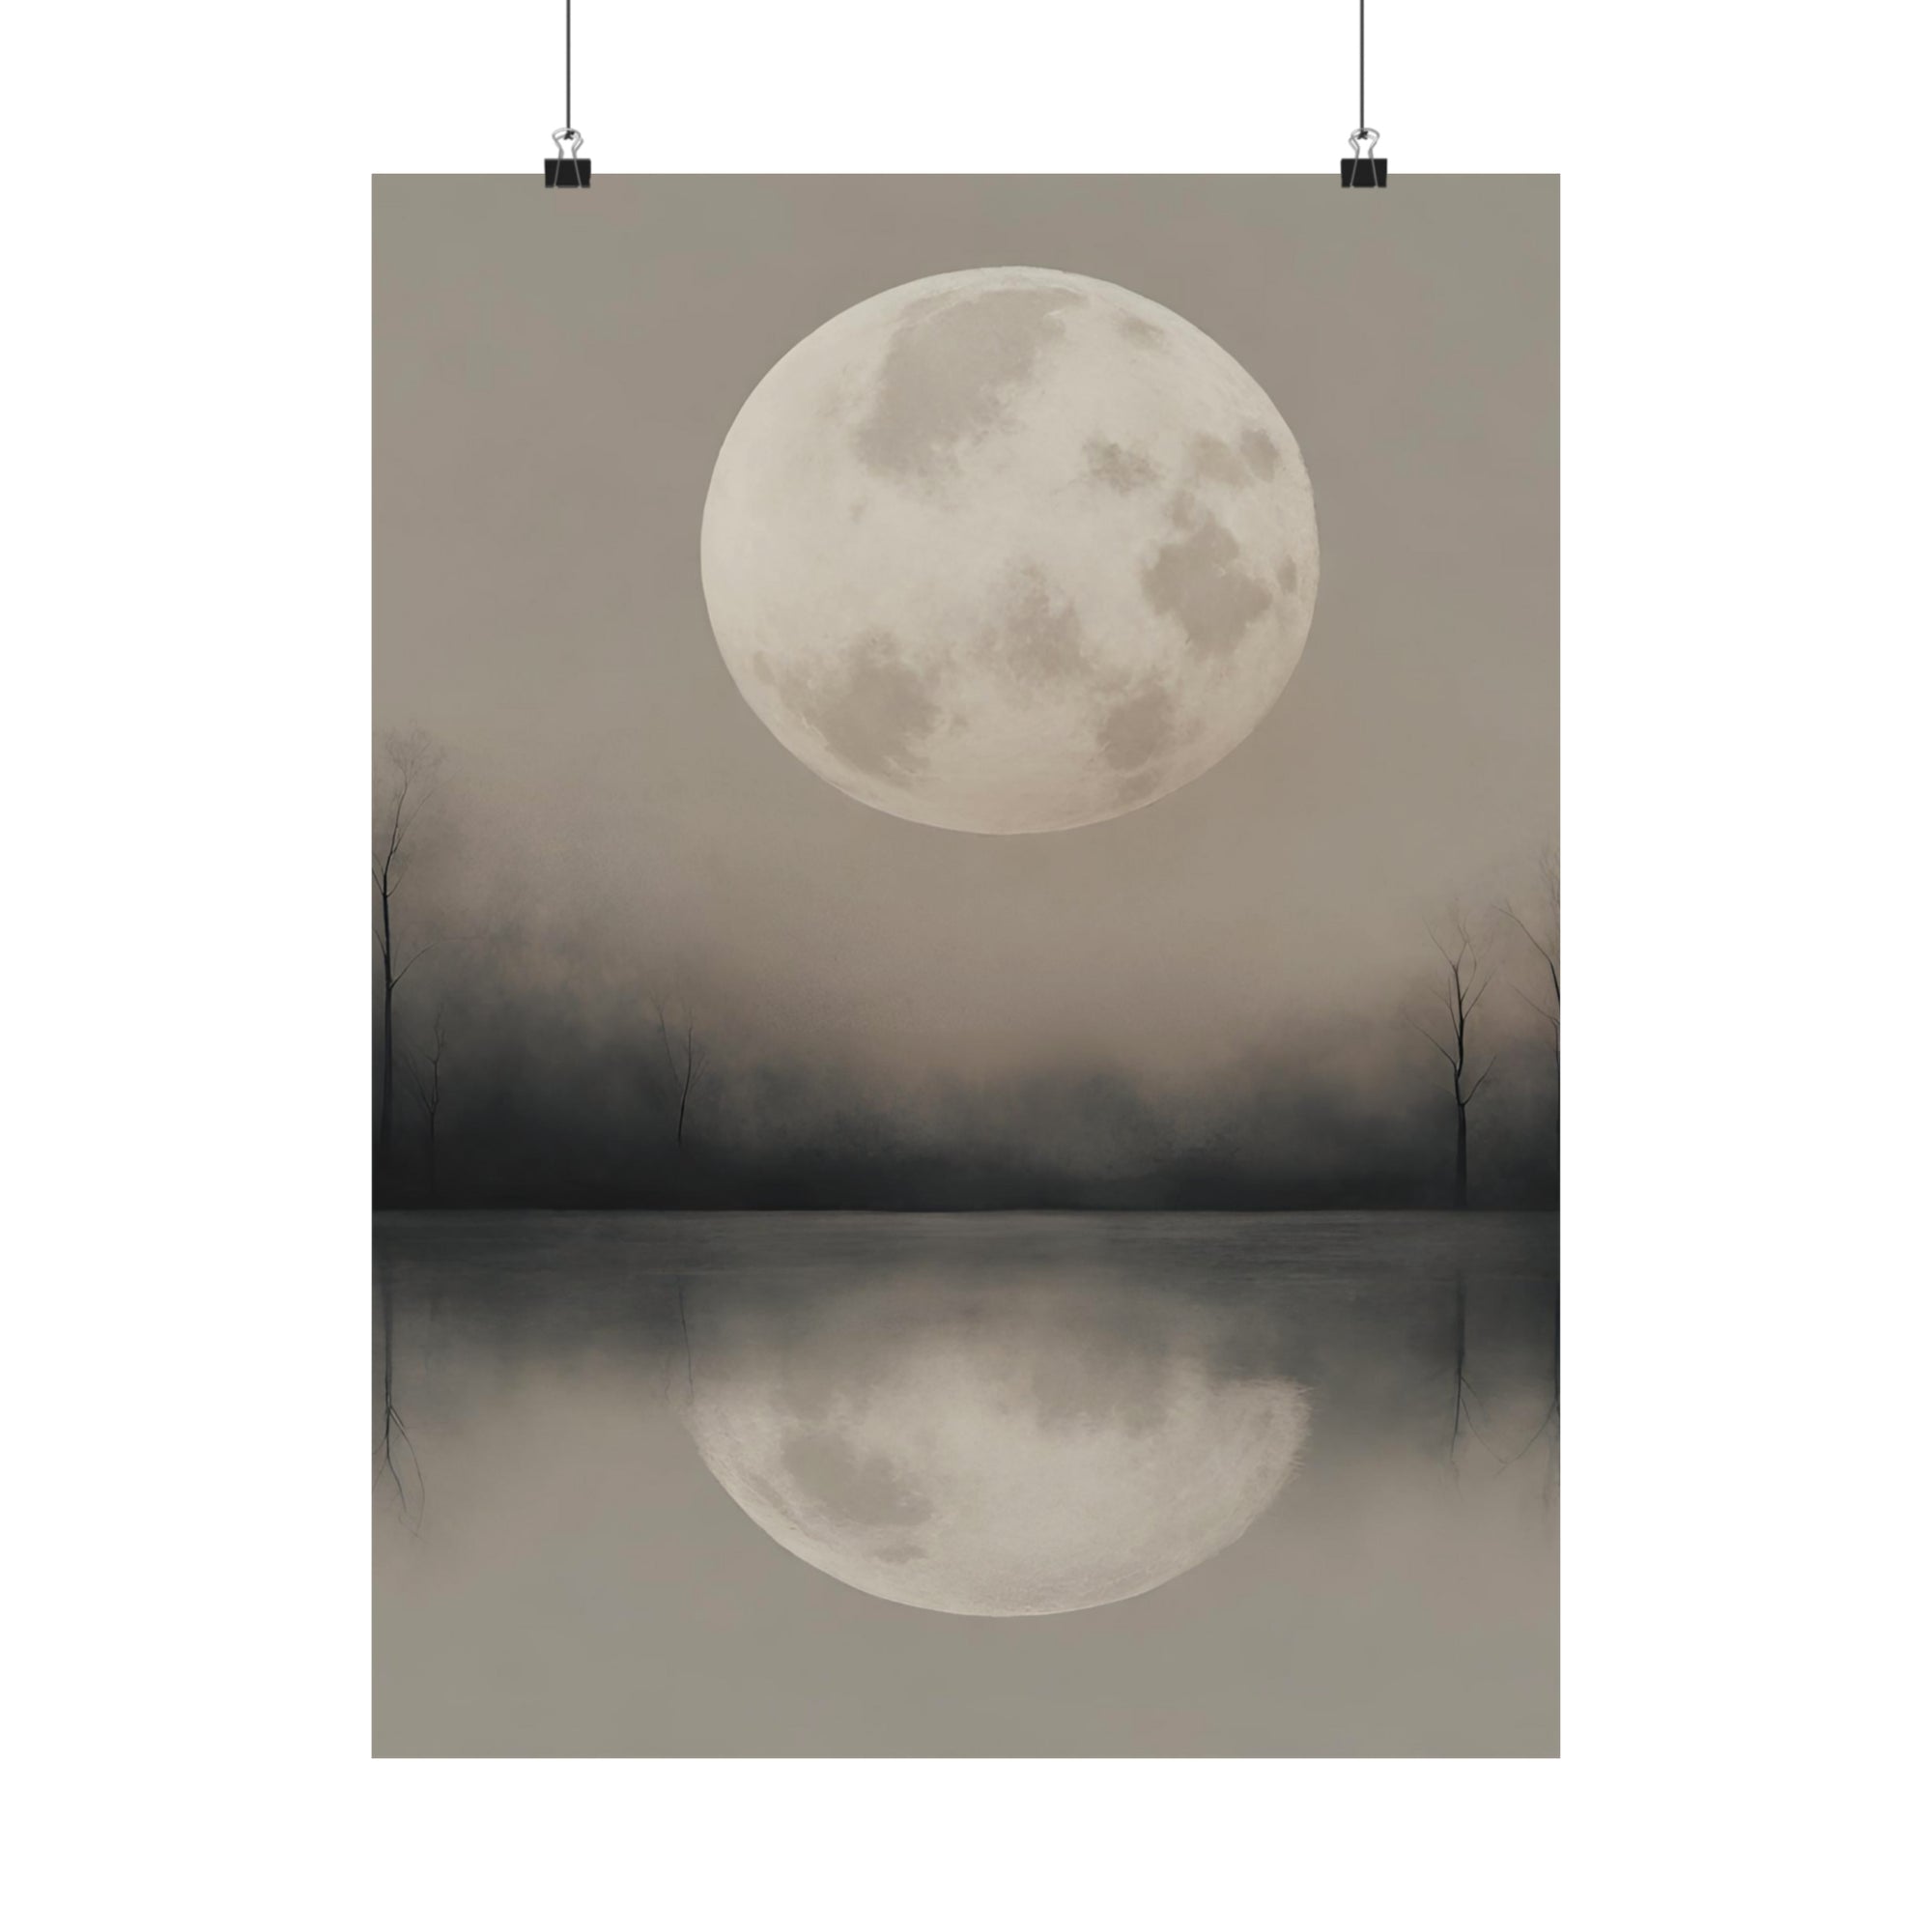 Moody Mysterious Series - Moon 1 - Matte Vertical Abstract Art Posters